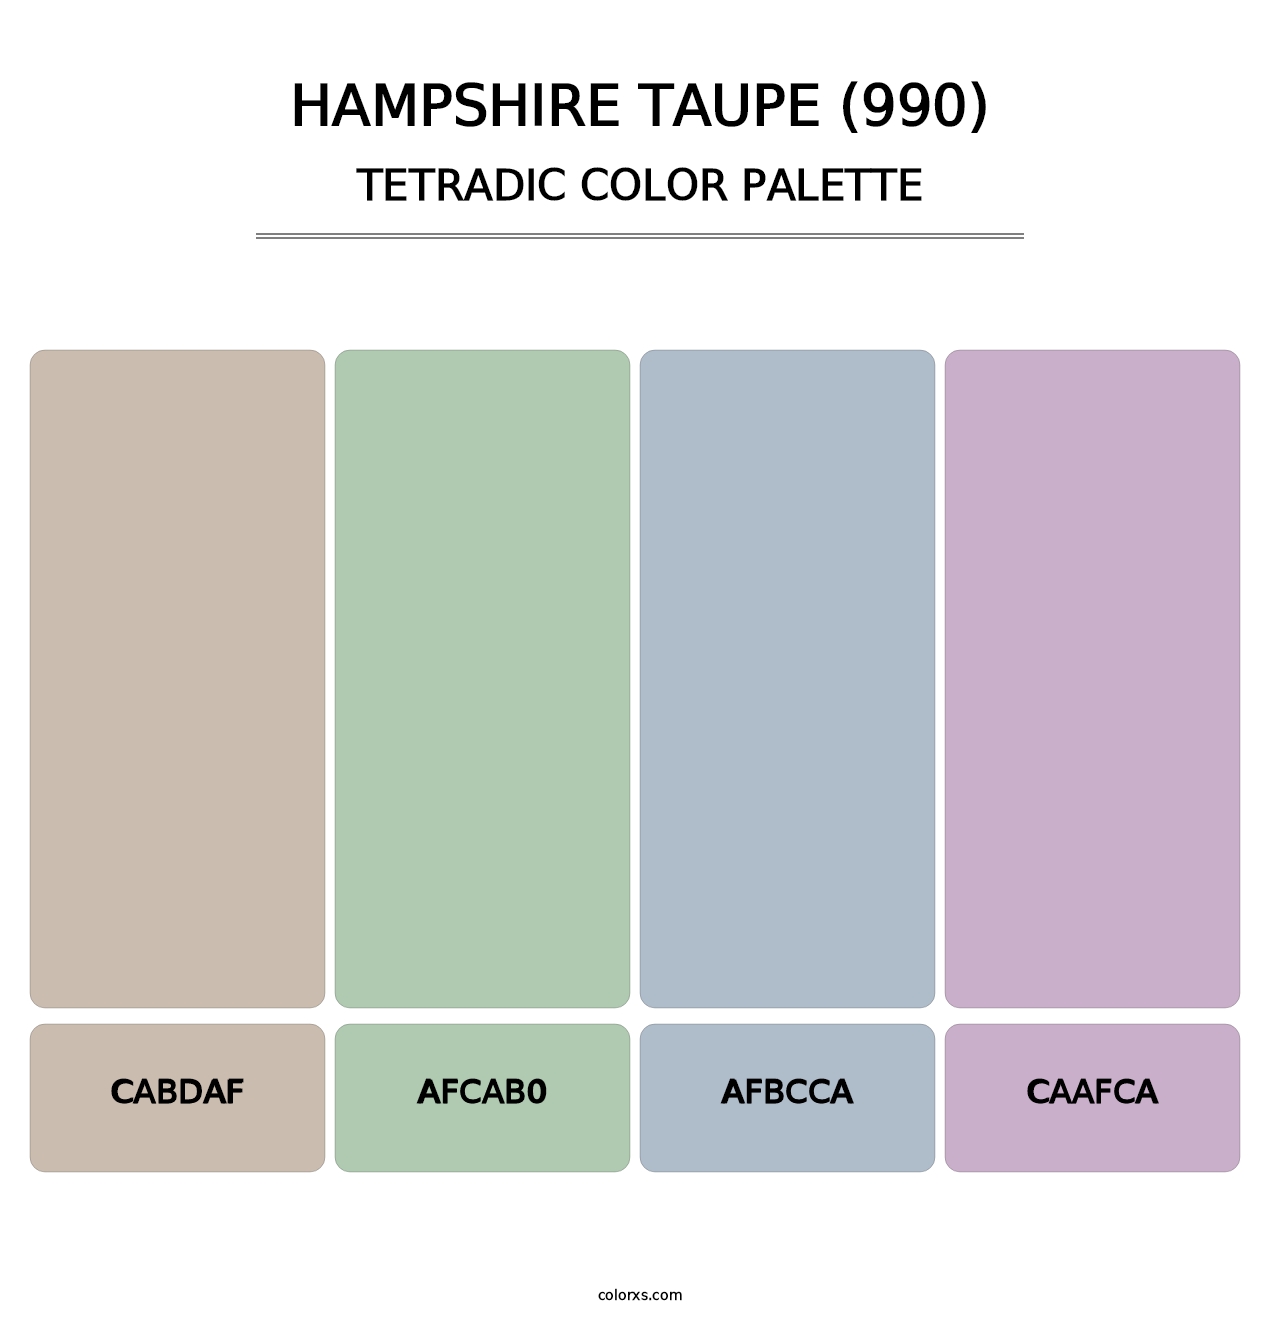 Hampshire Taupe (990) - Tetradic Color Palette